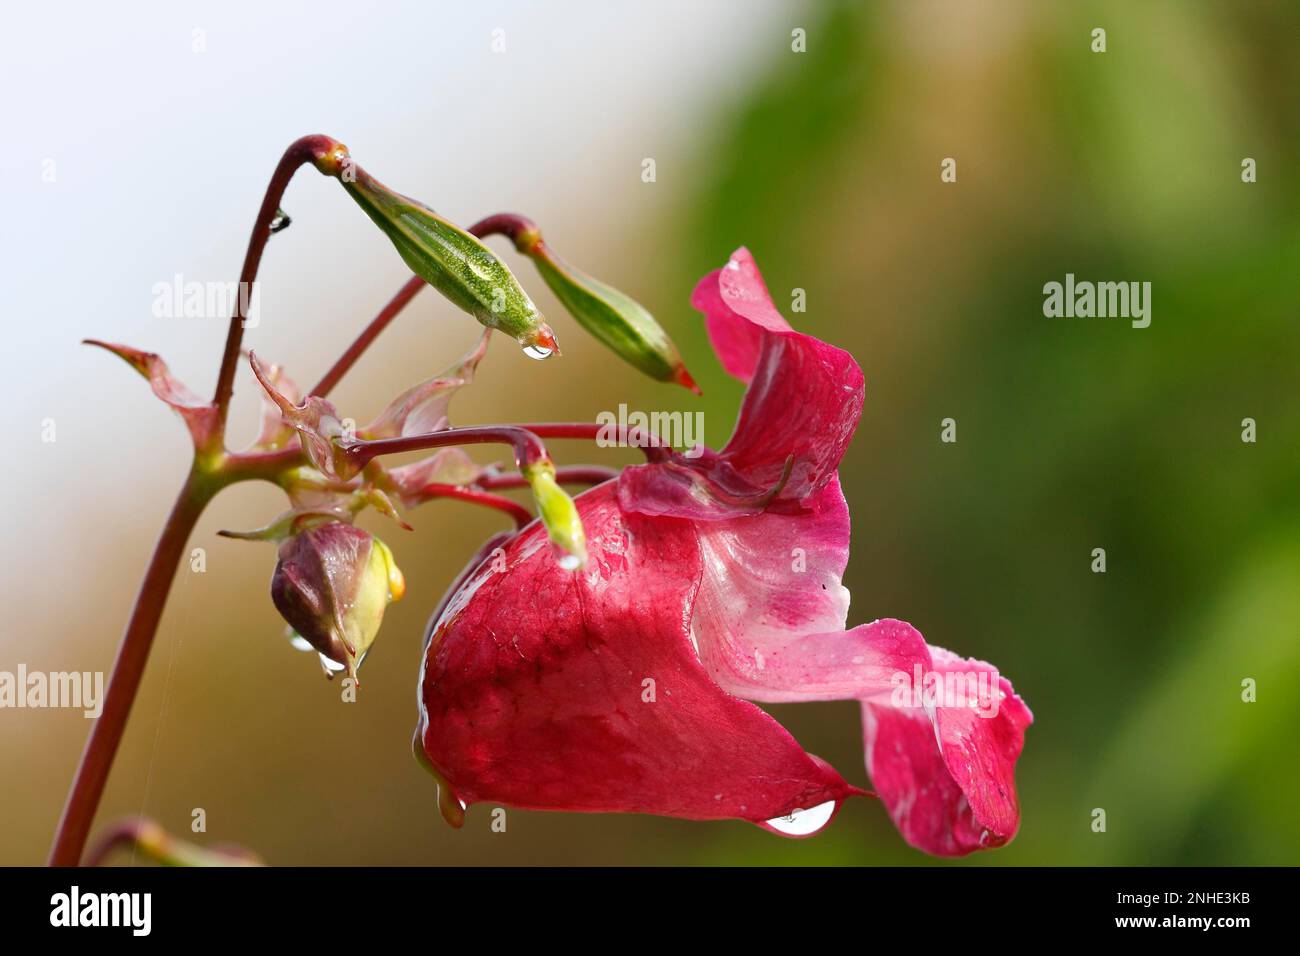 Himalayan balsam (Impatiens glandulifera), himalayan balsam, Red balsam, Himalayan balsam, Peasant orchid, Giant balsam, Flower with water drop Stock Photo